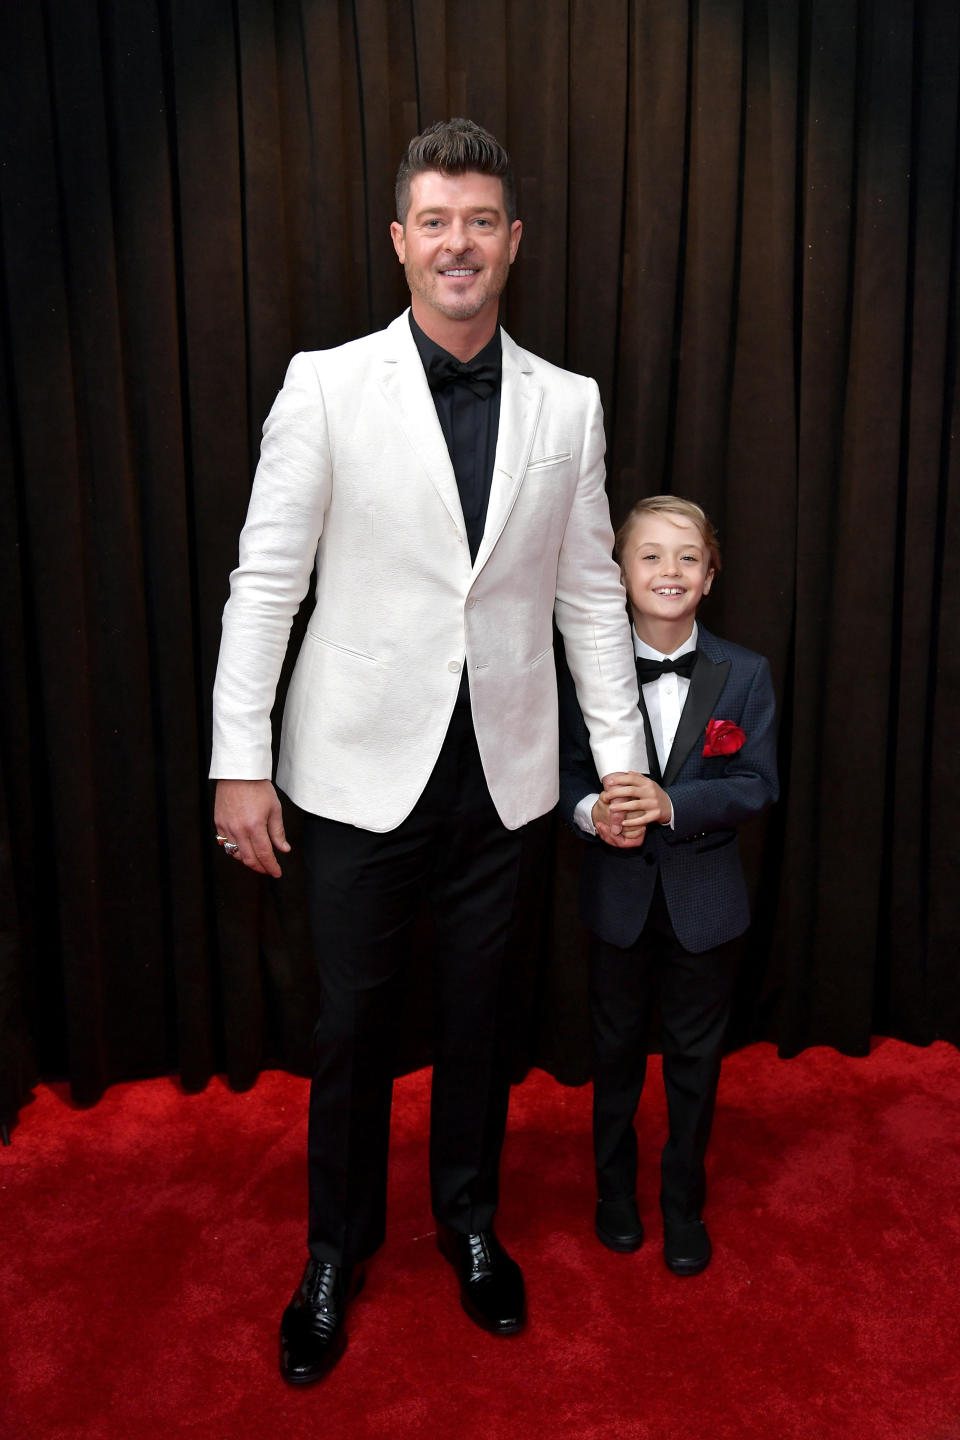 Robin Thicke and his 8-year-old son, Julian Fuego Thicke.